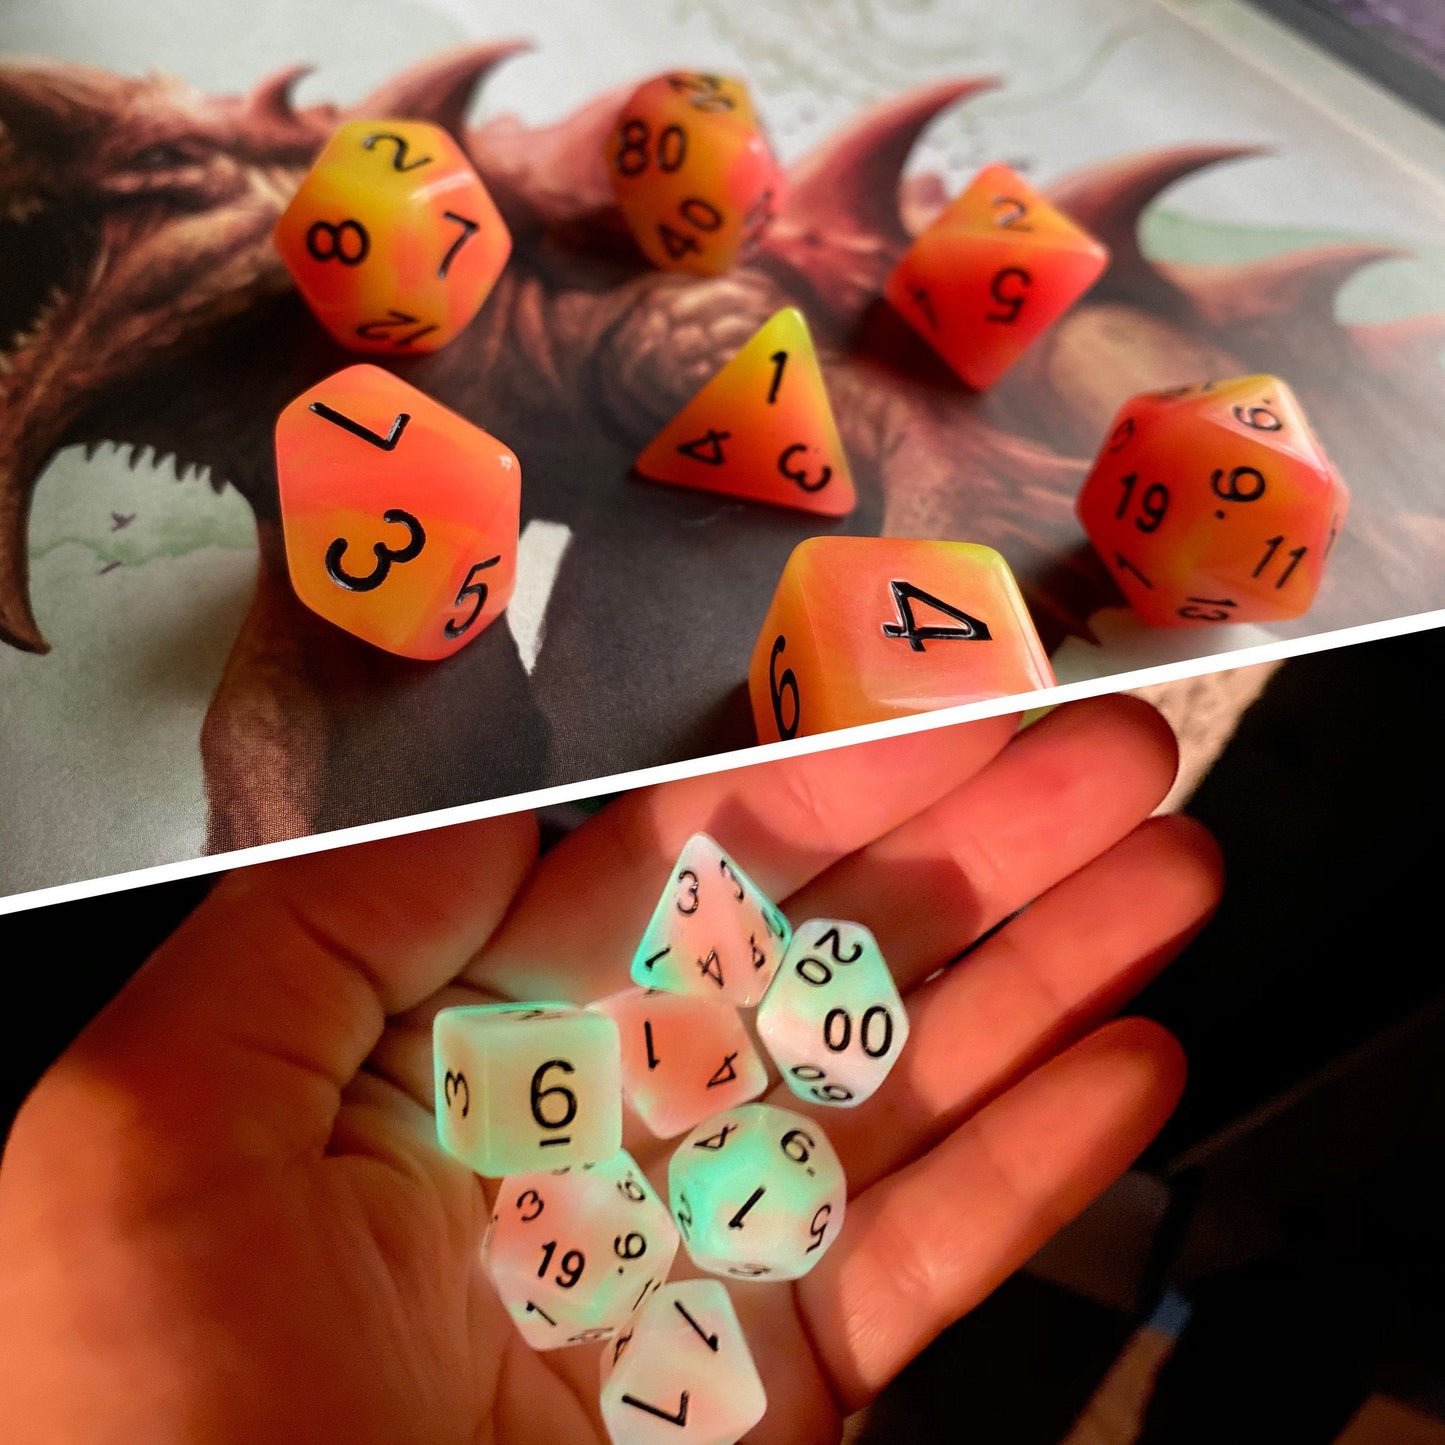 FREE Today: TARRASQUE glow in the Dark Polyhedral Dice Set